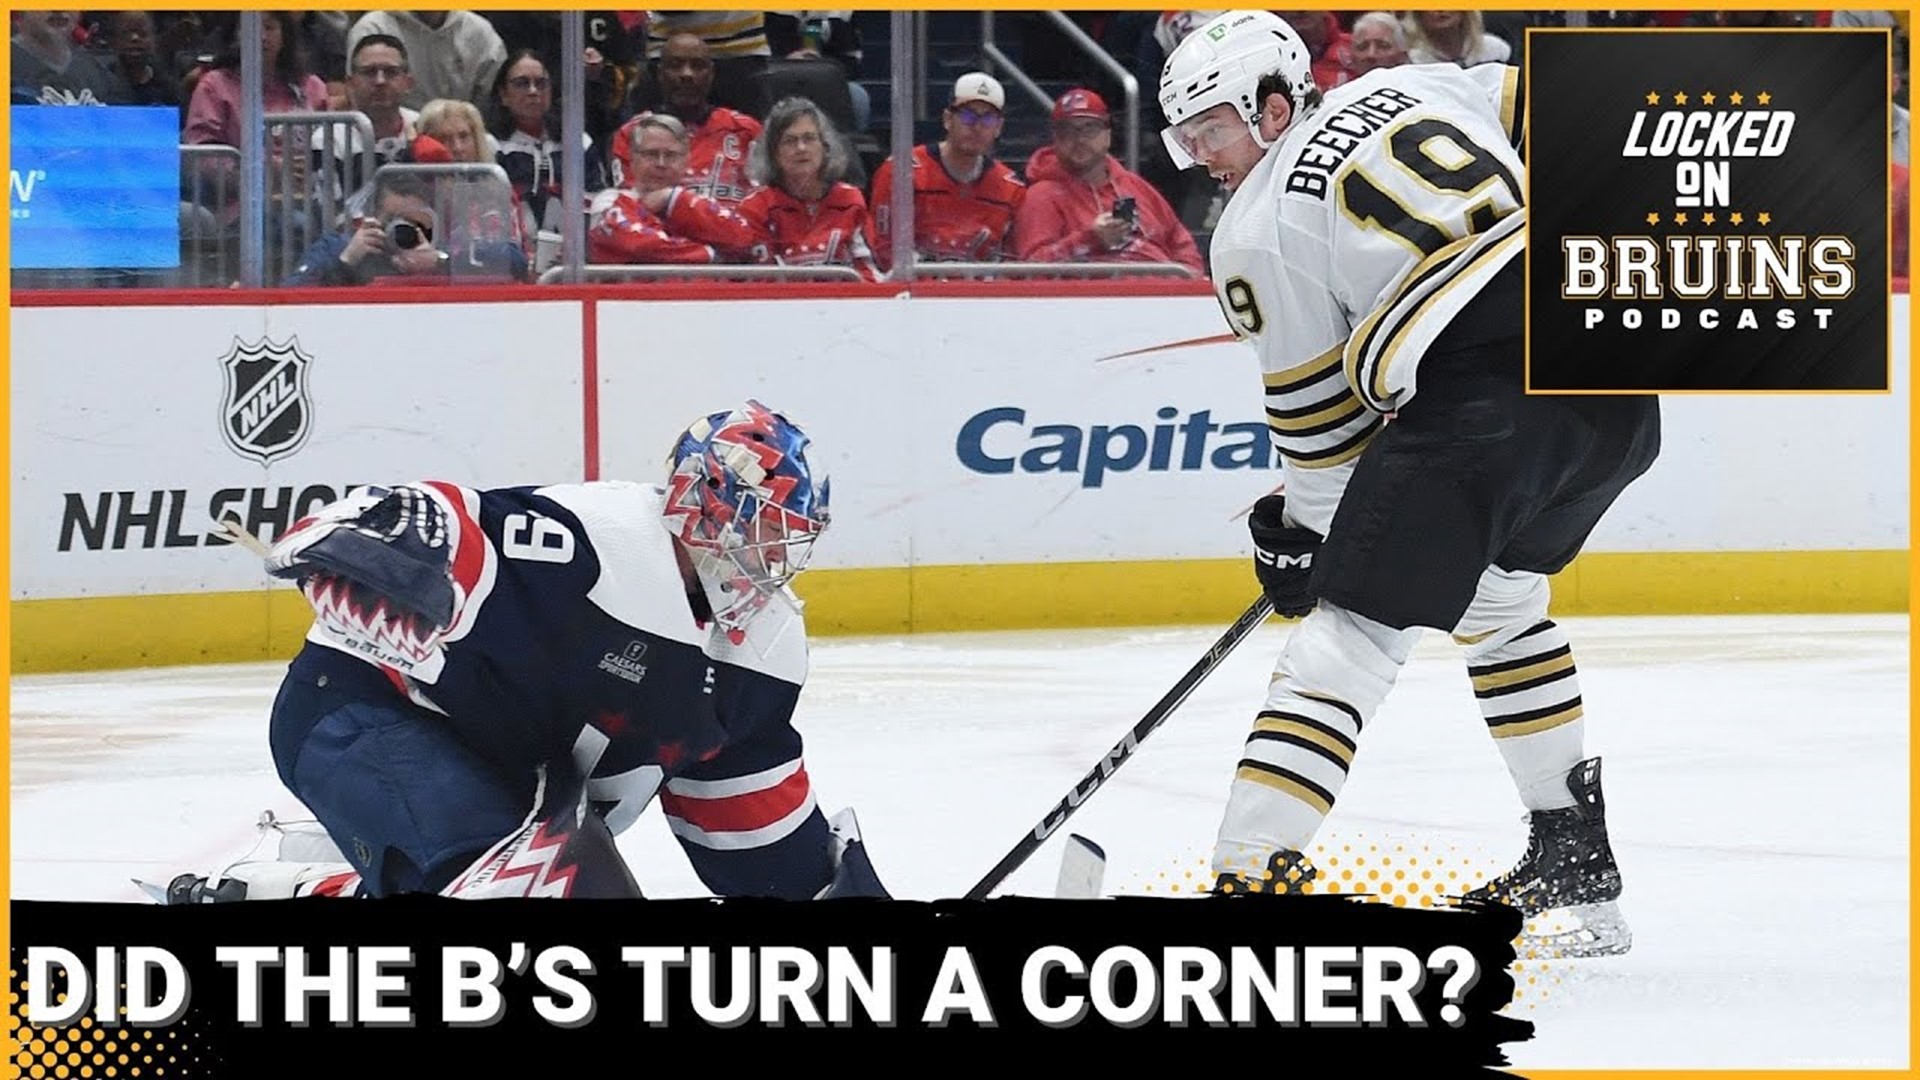 Did the Bruins turn a corner in shootout win over Capitals?